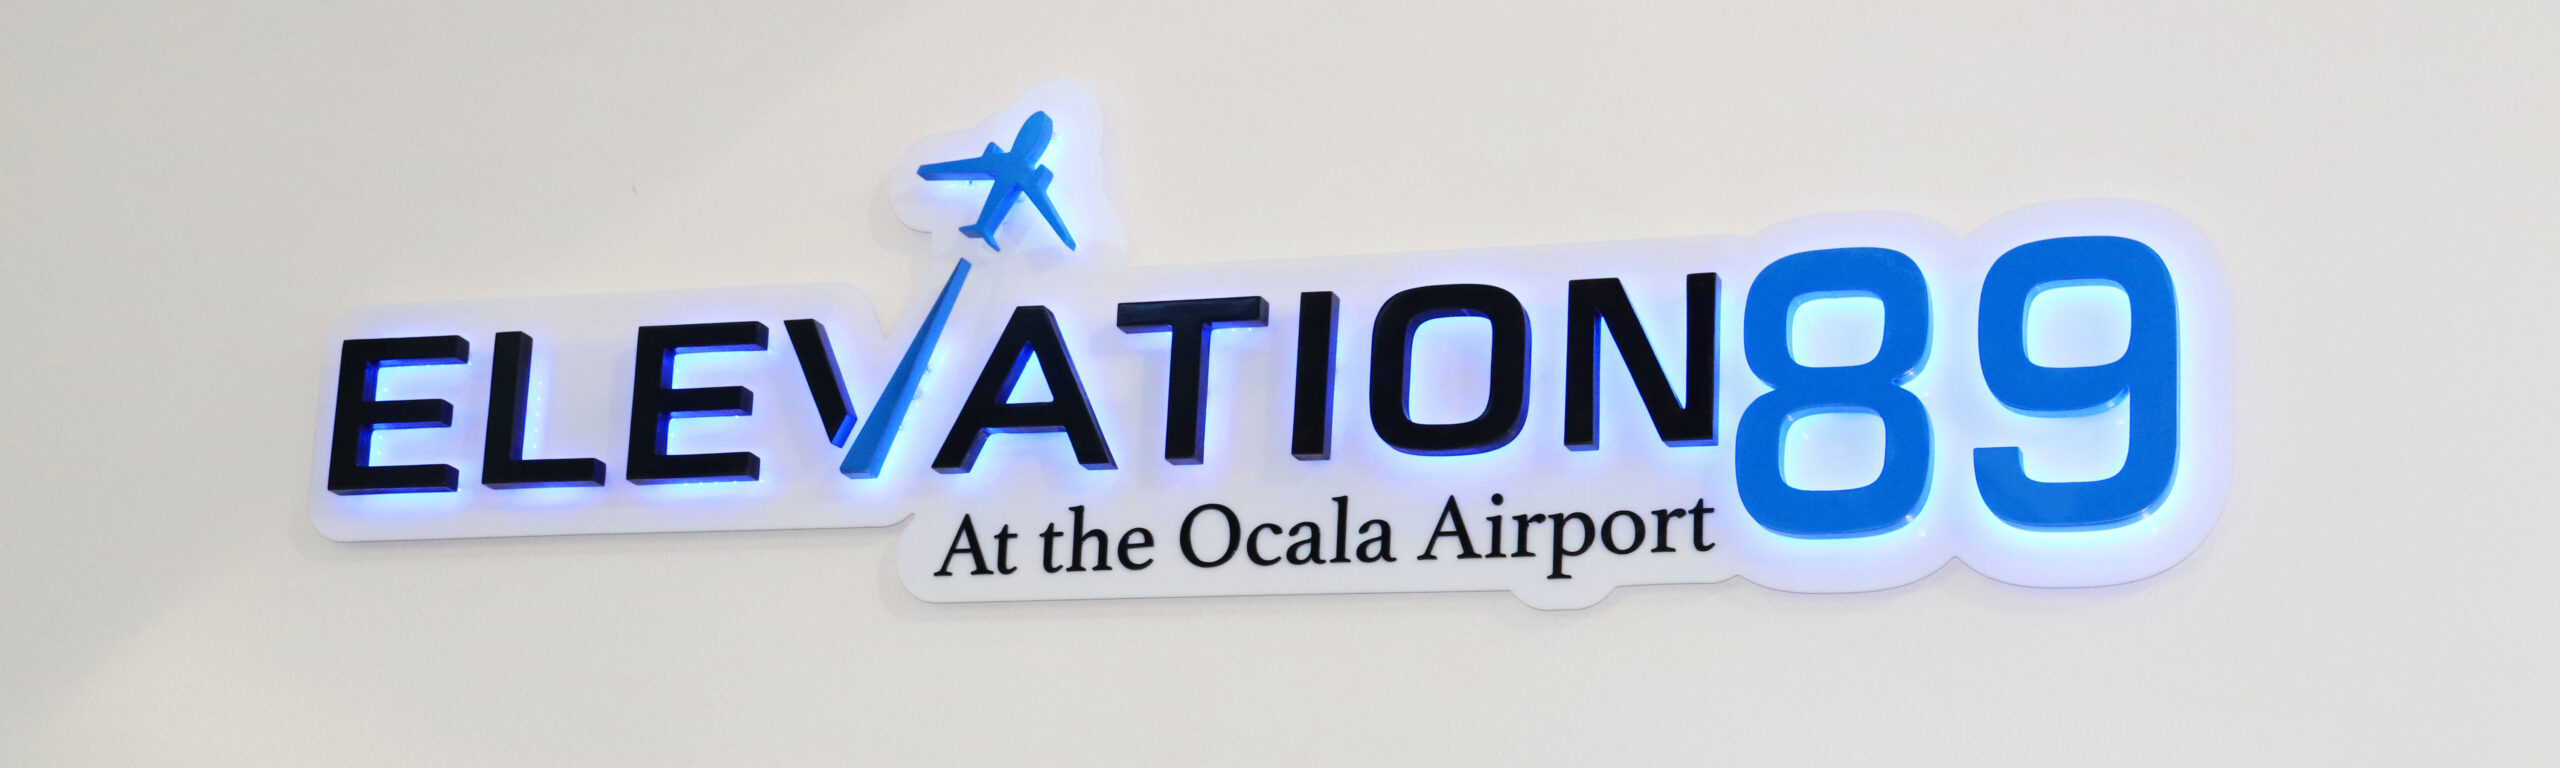 Elevation 89 at the Ocala Airport